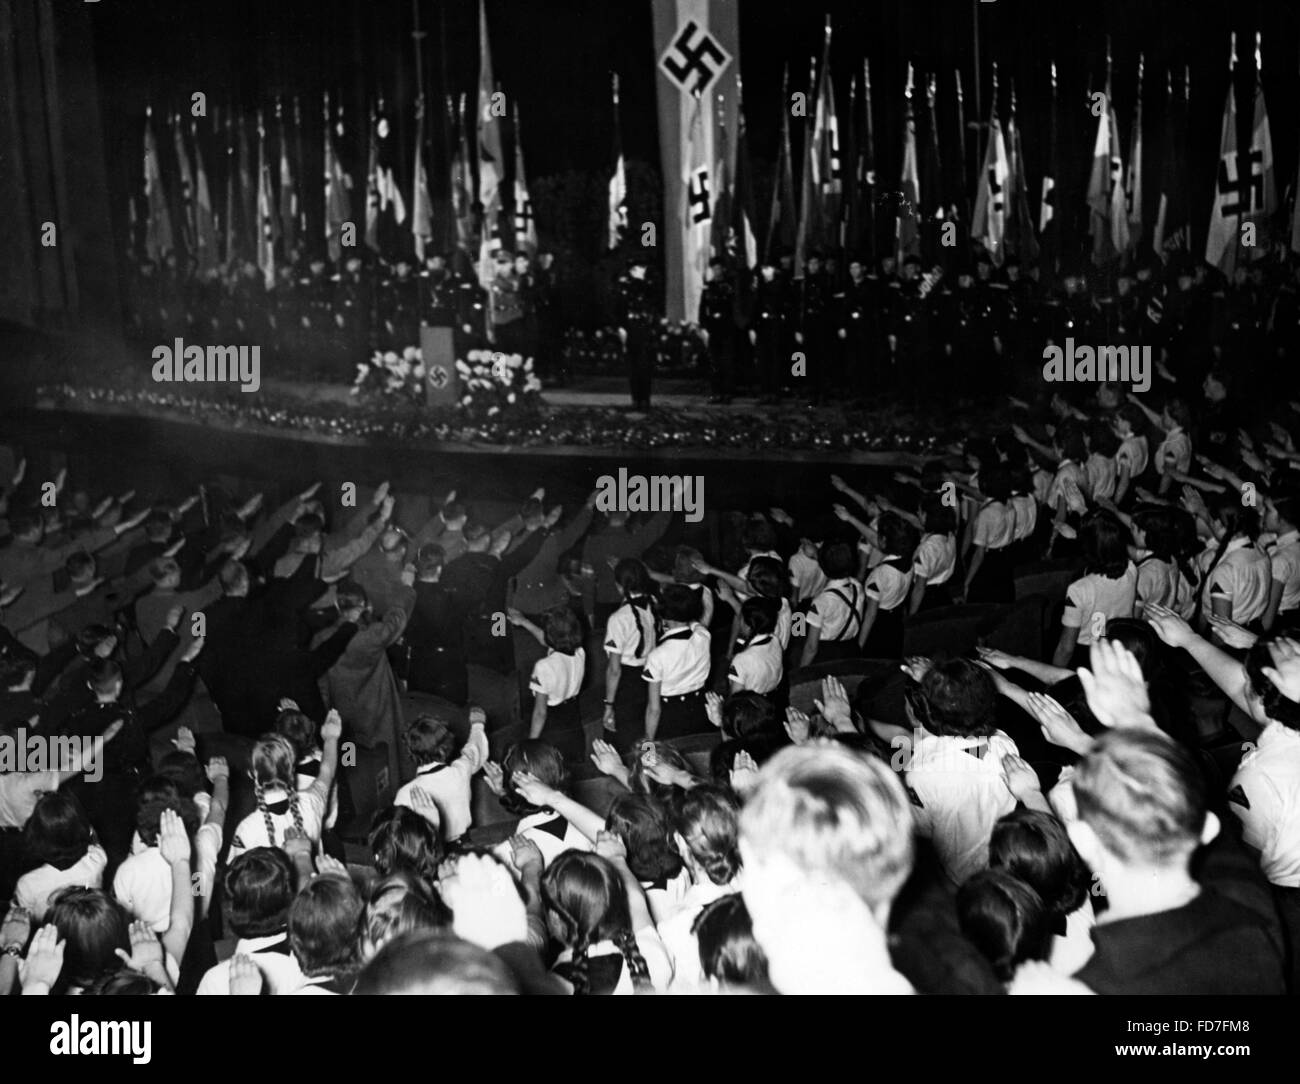 Verpflichtung der Jugend (Commitment of the Youth) ceremony in the Theater des Volkes in Berlin, 1940 Stock Photo